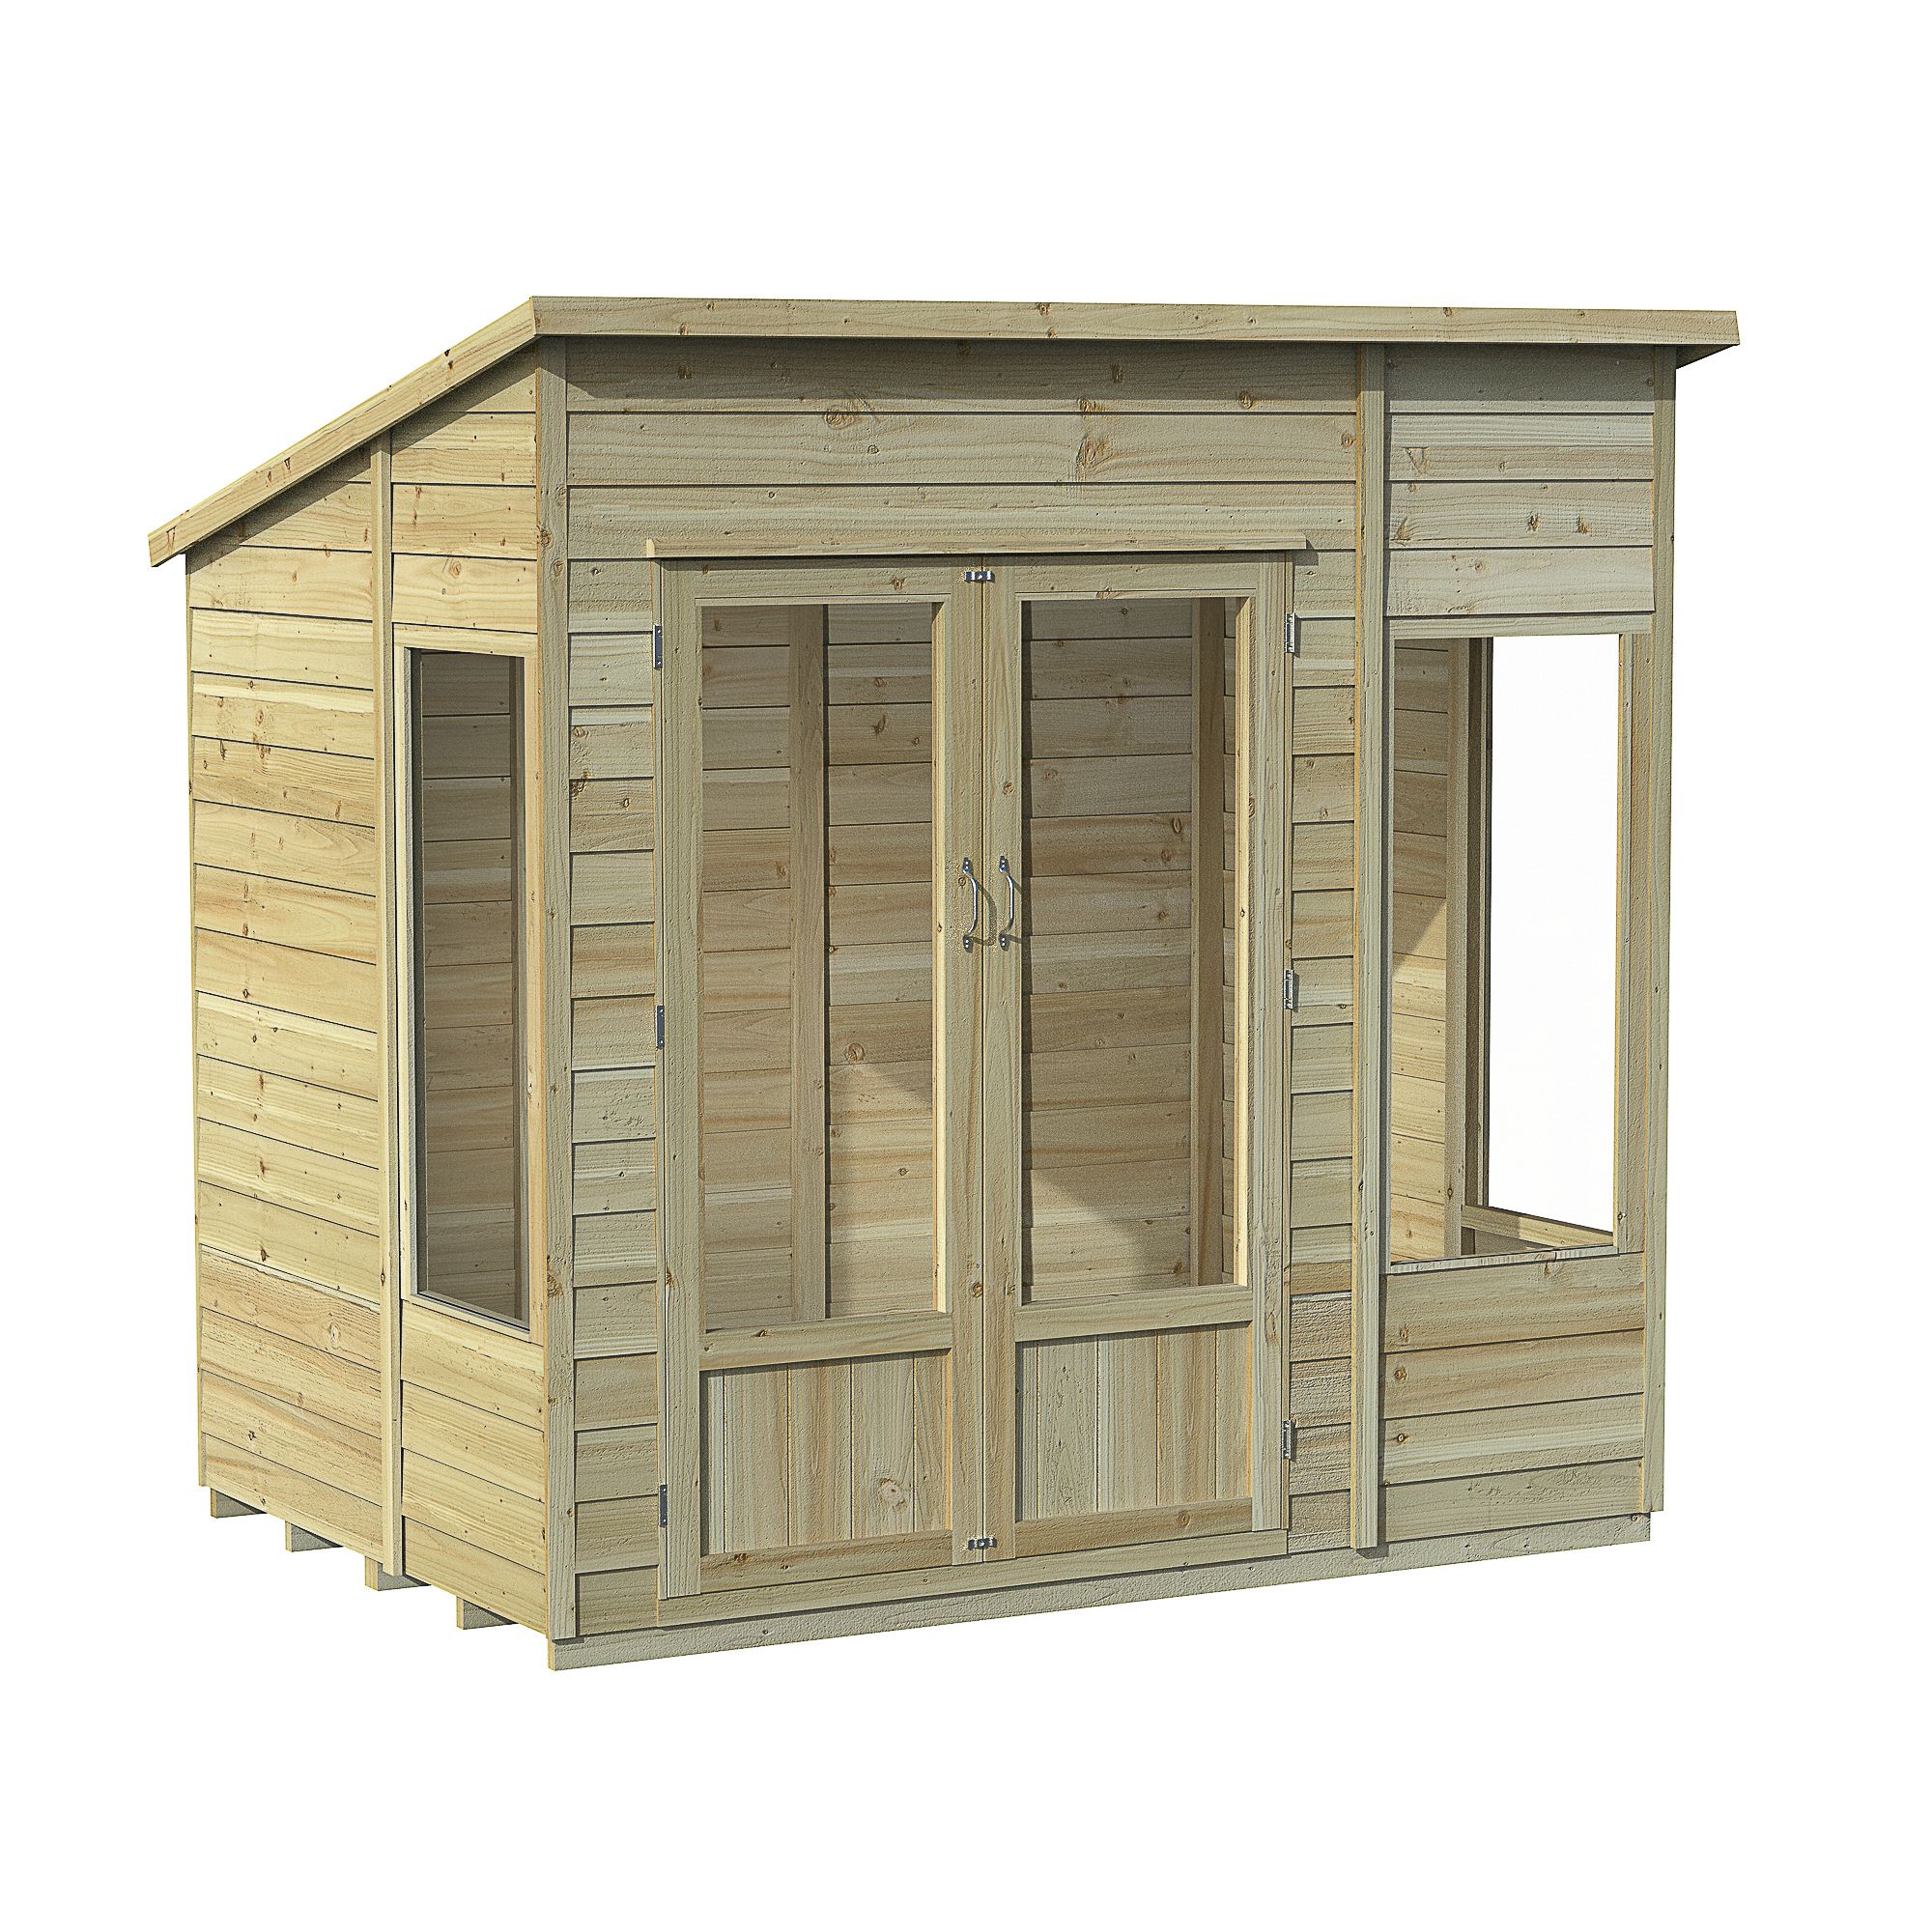 Forest Garden Oakley 7x5 ft with Double door & 3 windows Pent Wooden Summer house (Base included) - Assembly service included